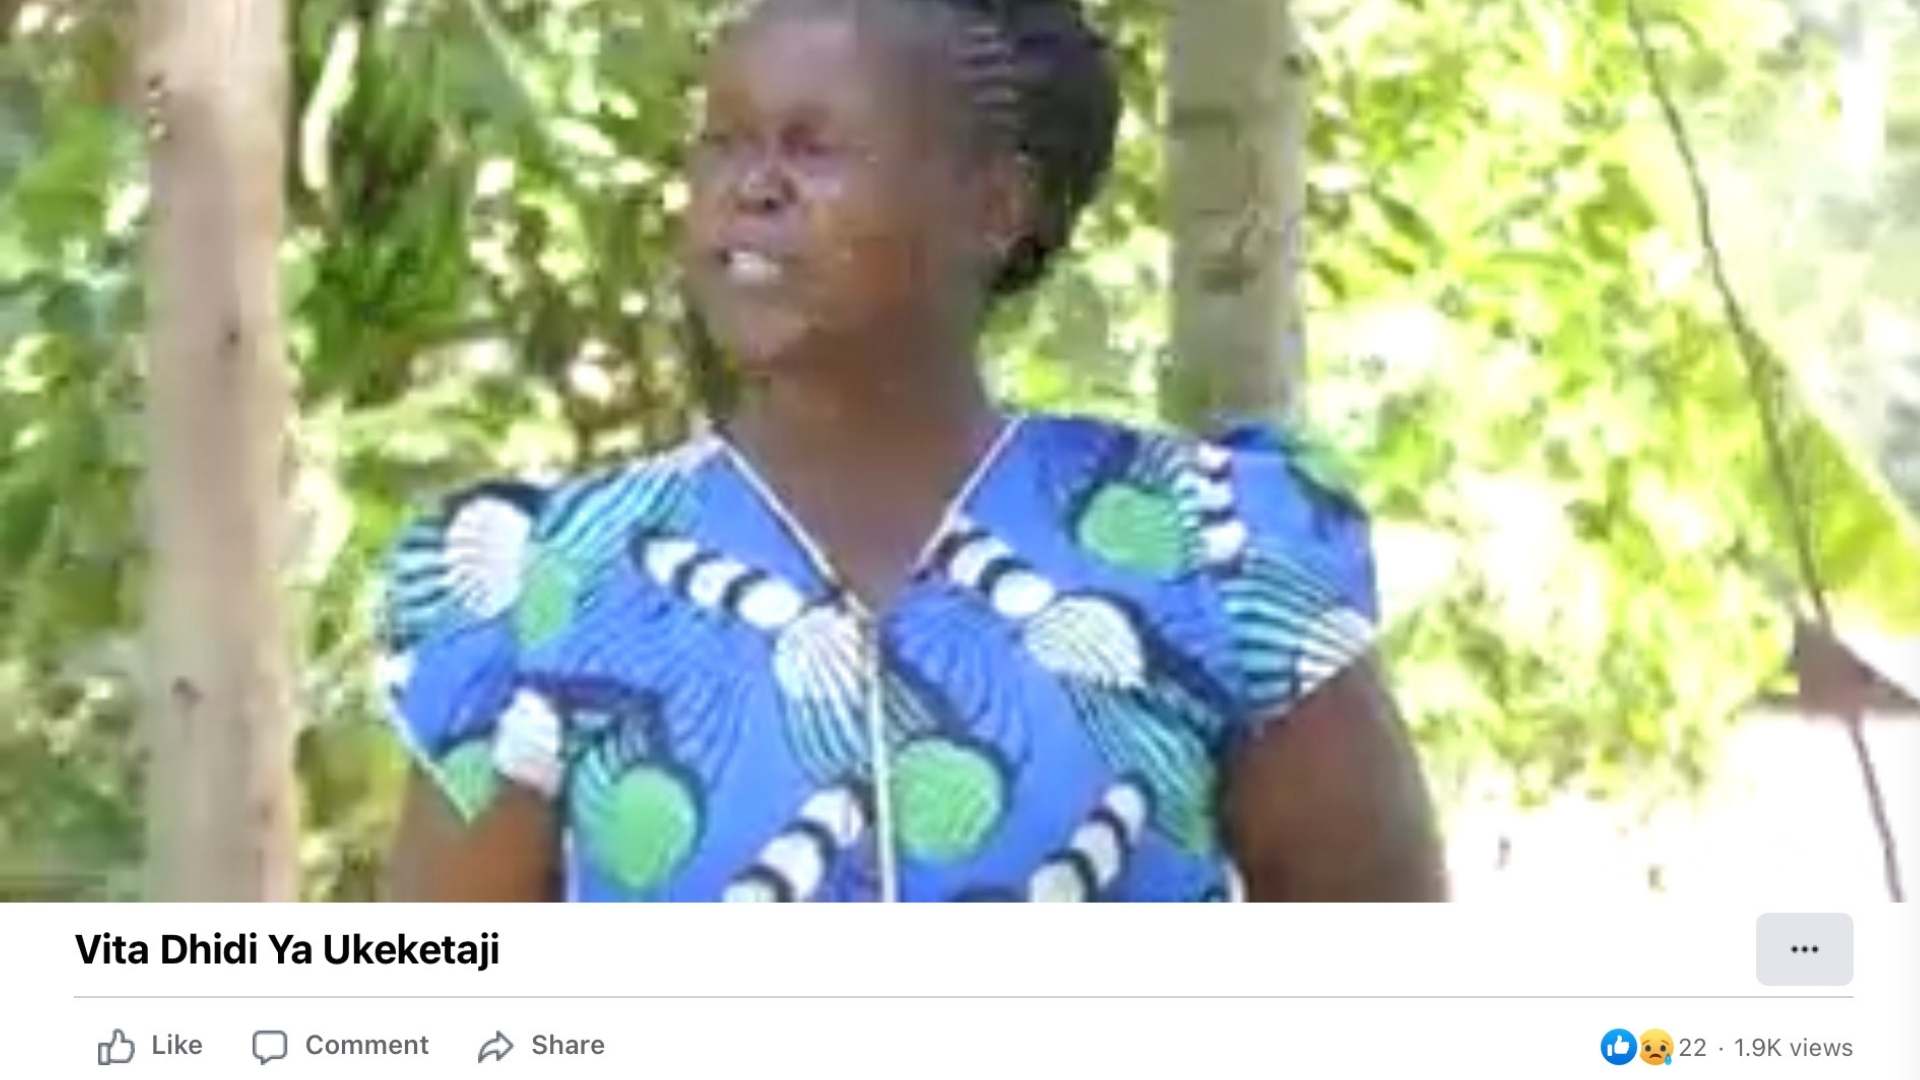 Read more about the article Ex-Cutters speak out on Social Media channels against FGM, Kuria County, Kenya 